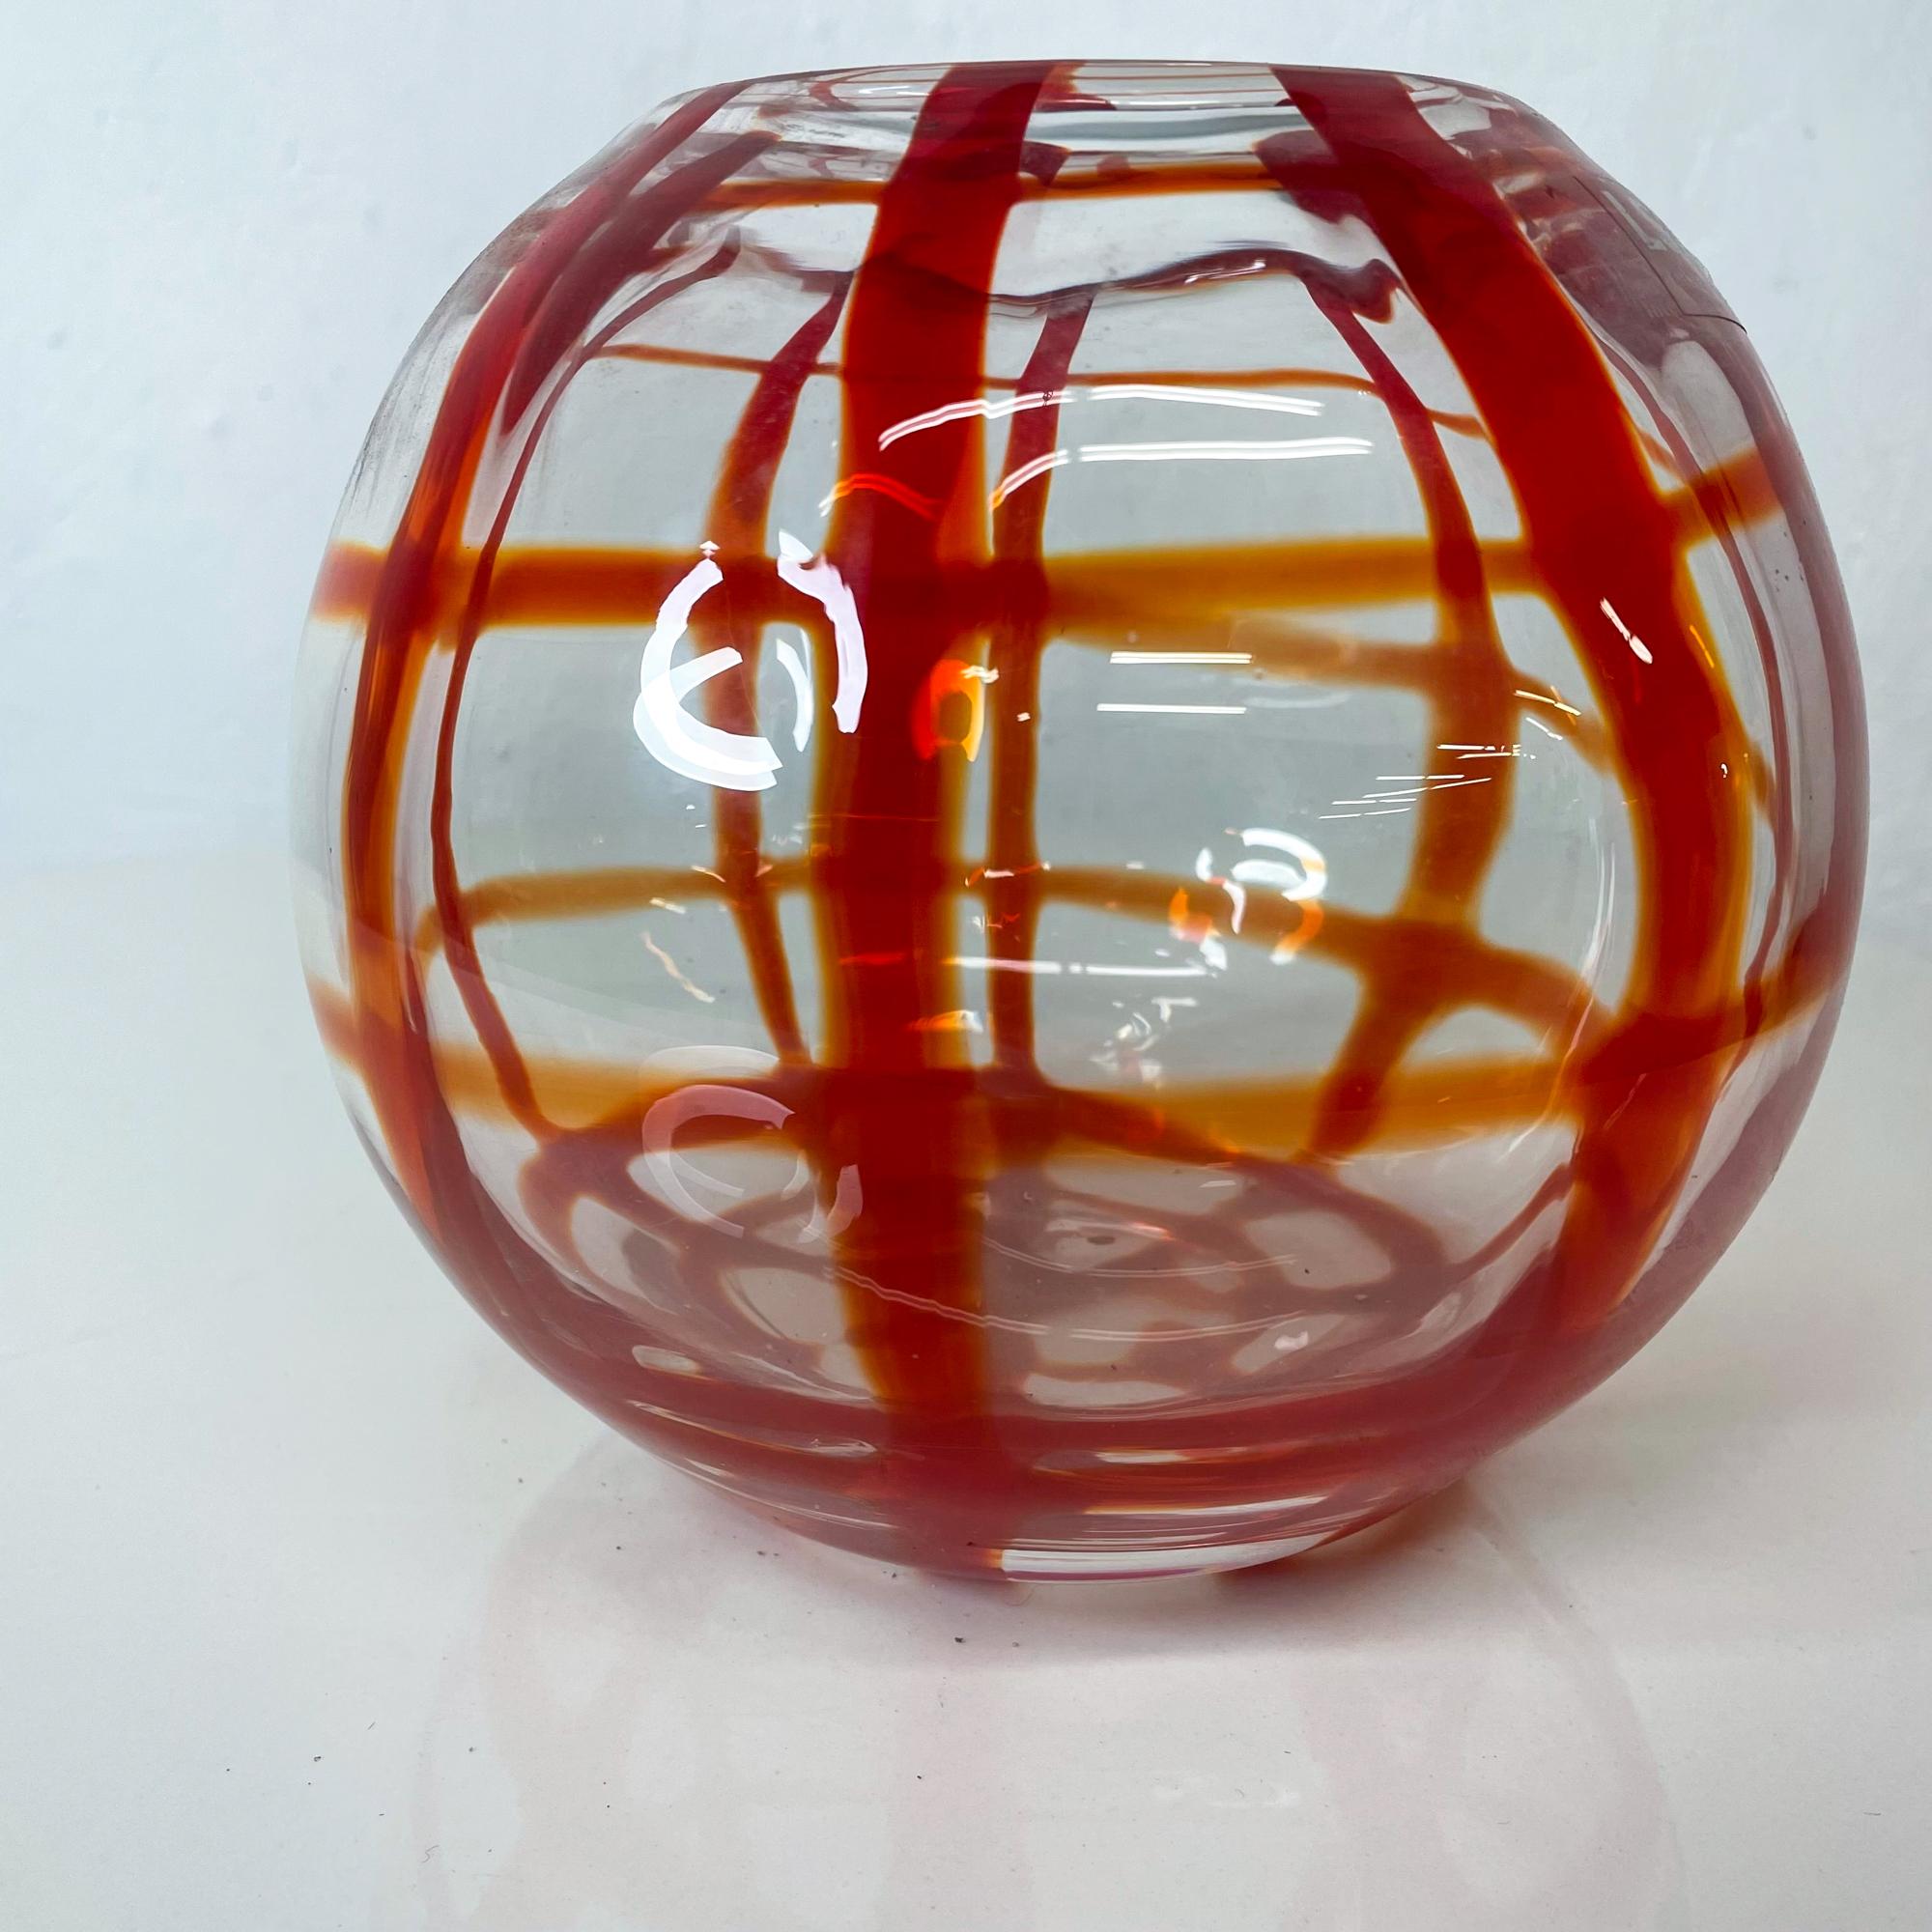 Mid-Century Modern LSA International Art Glass Vase Bold Red Lines Handcrafted Mouth Blown Poland